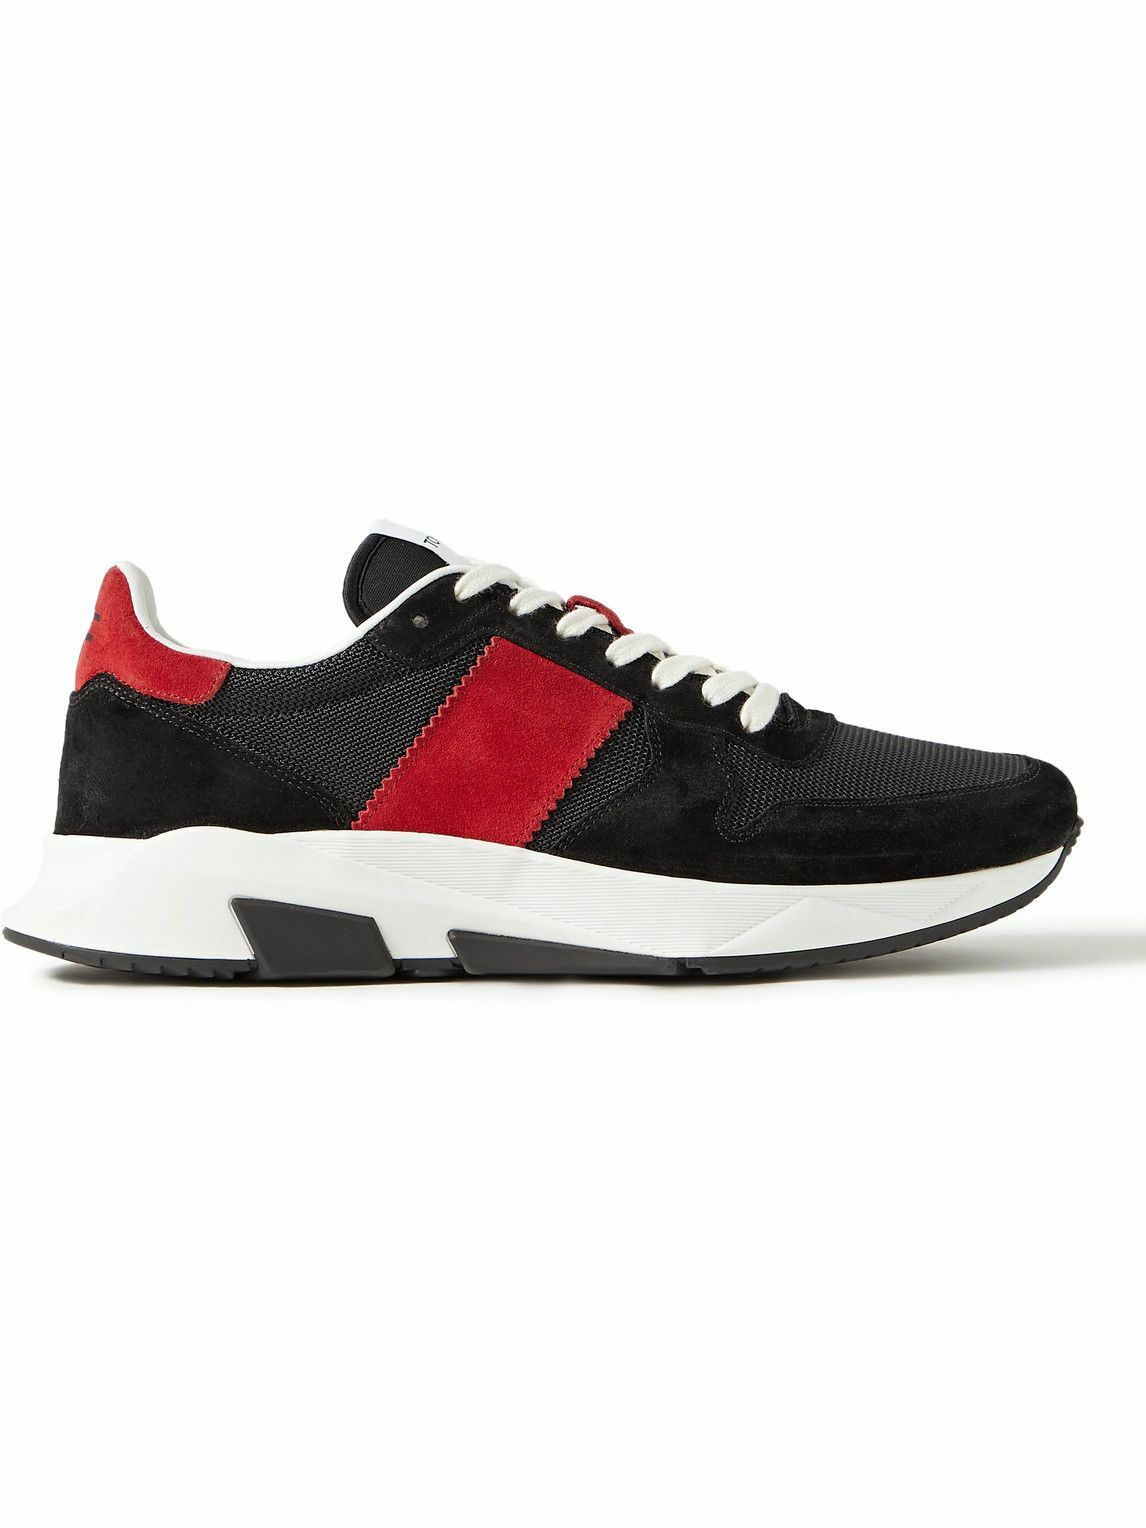 TOM FORD - Jagga Suede and Mesh Sneakers - Black TOM FORD